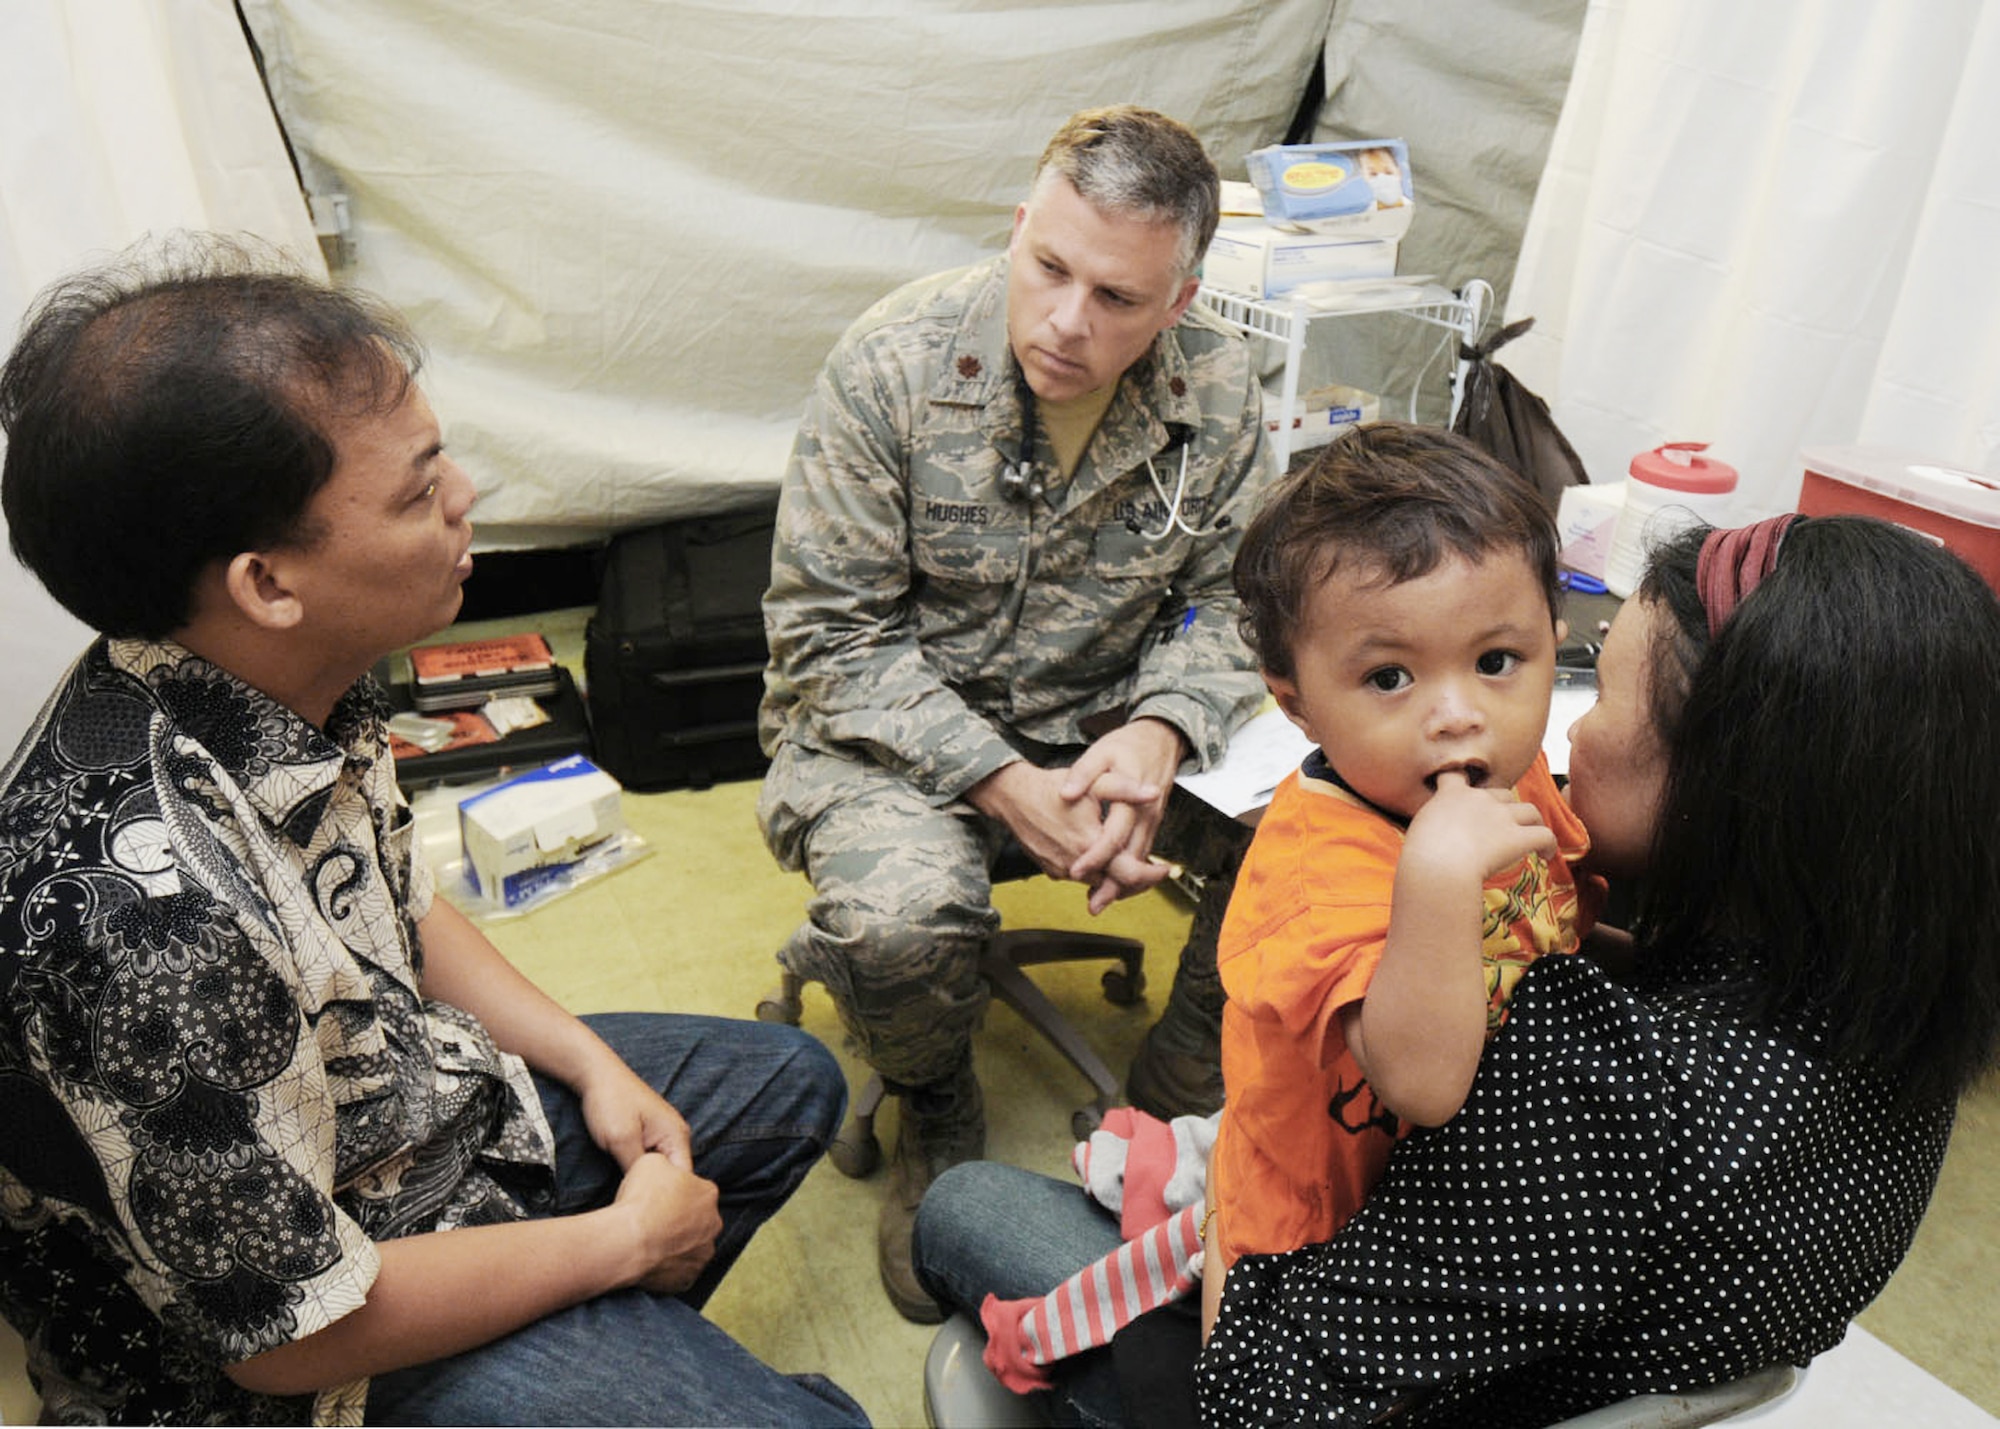 Maj. Scott Hughes gathers medical information from a patient with the help of Hasbi, a local interpreter, Oct. 10, 2009, in Padang, Indonesia. Major Hughes is a doctor from the 36th Medical Group at Andersen Air Force Base, Guam, and is deployed here with a U.S. Air Force humanitarian assistance rapid response team to provide medical assistance to those affected by the recent earthquakes. (U.S. Air Force photo/Staff Sgt. Veronica Pierce) 